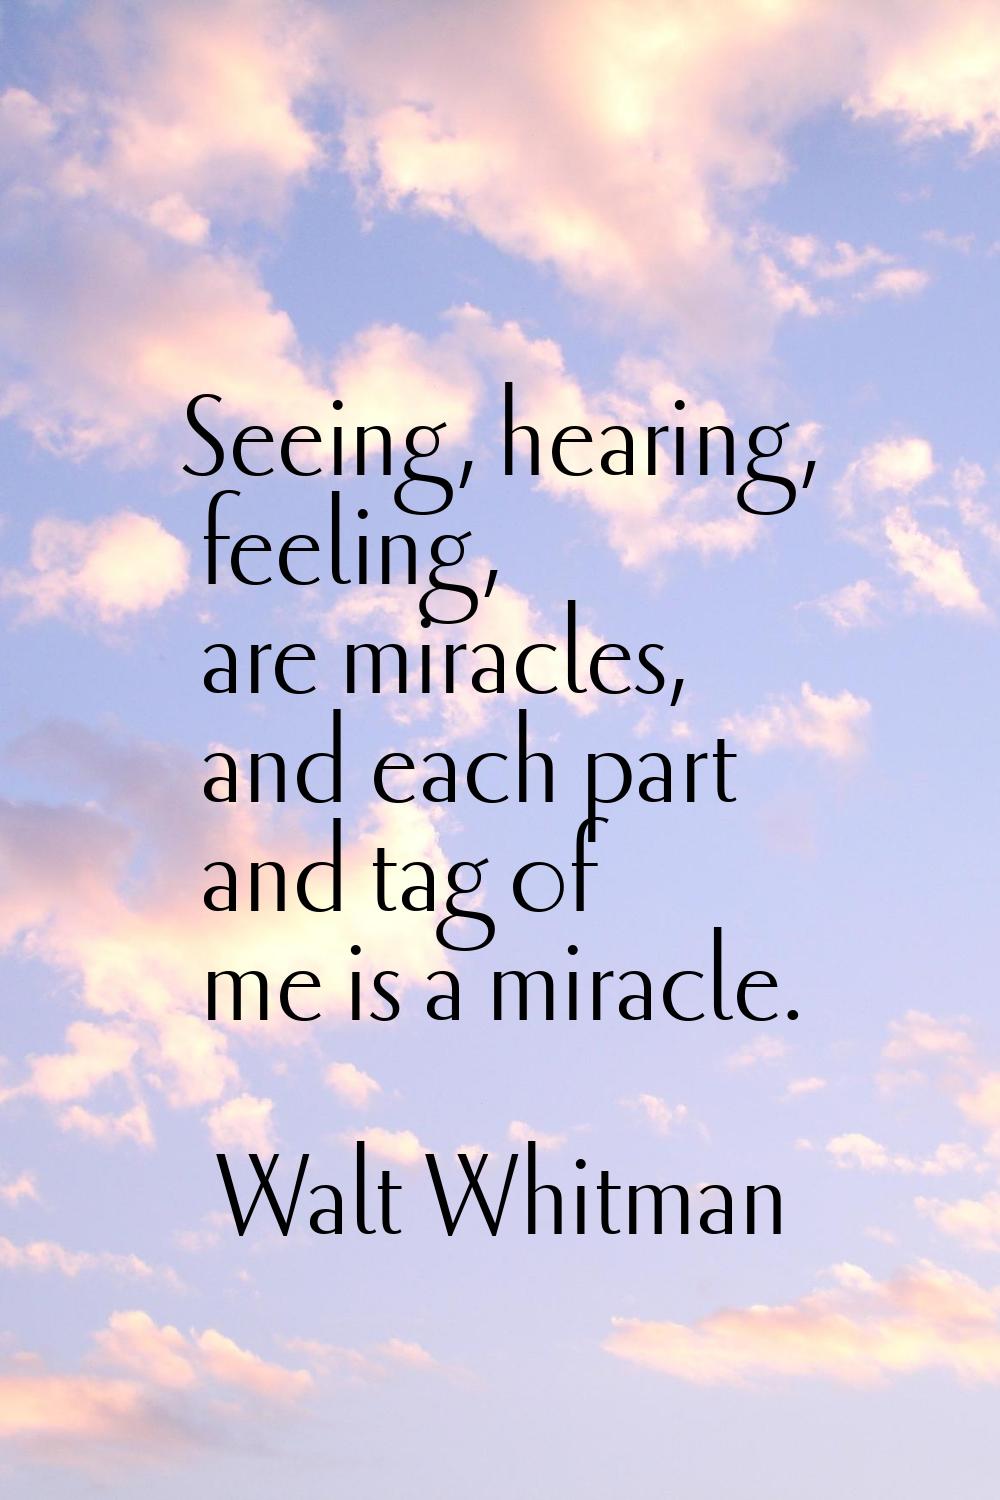 Seeing, hearing, feeling, are miracles, and each part and tag of me is a miracle.